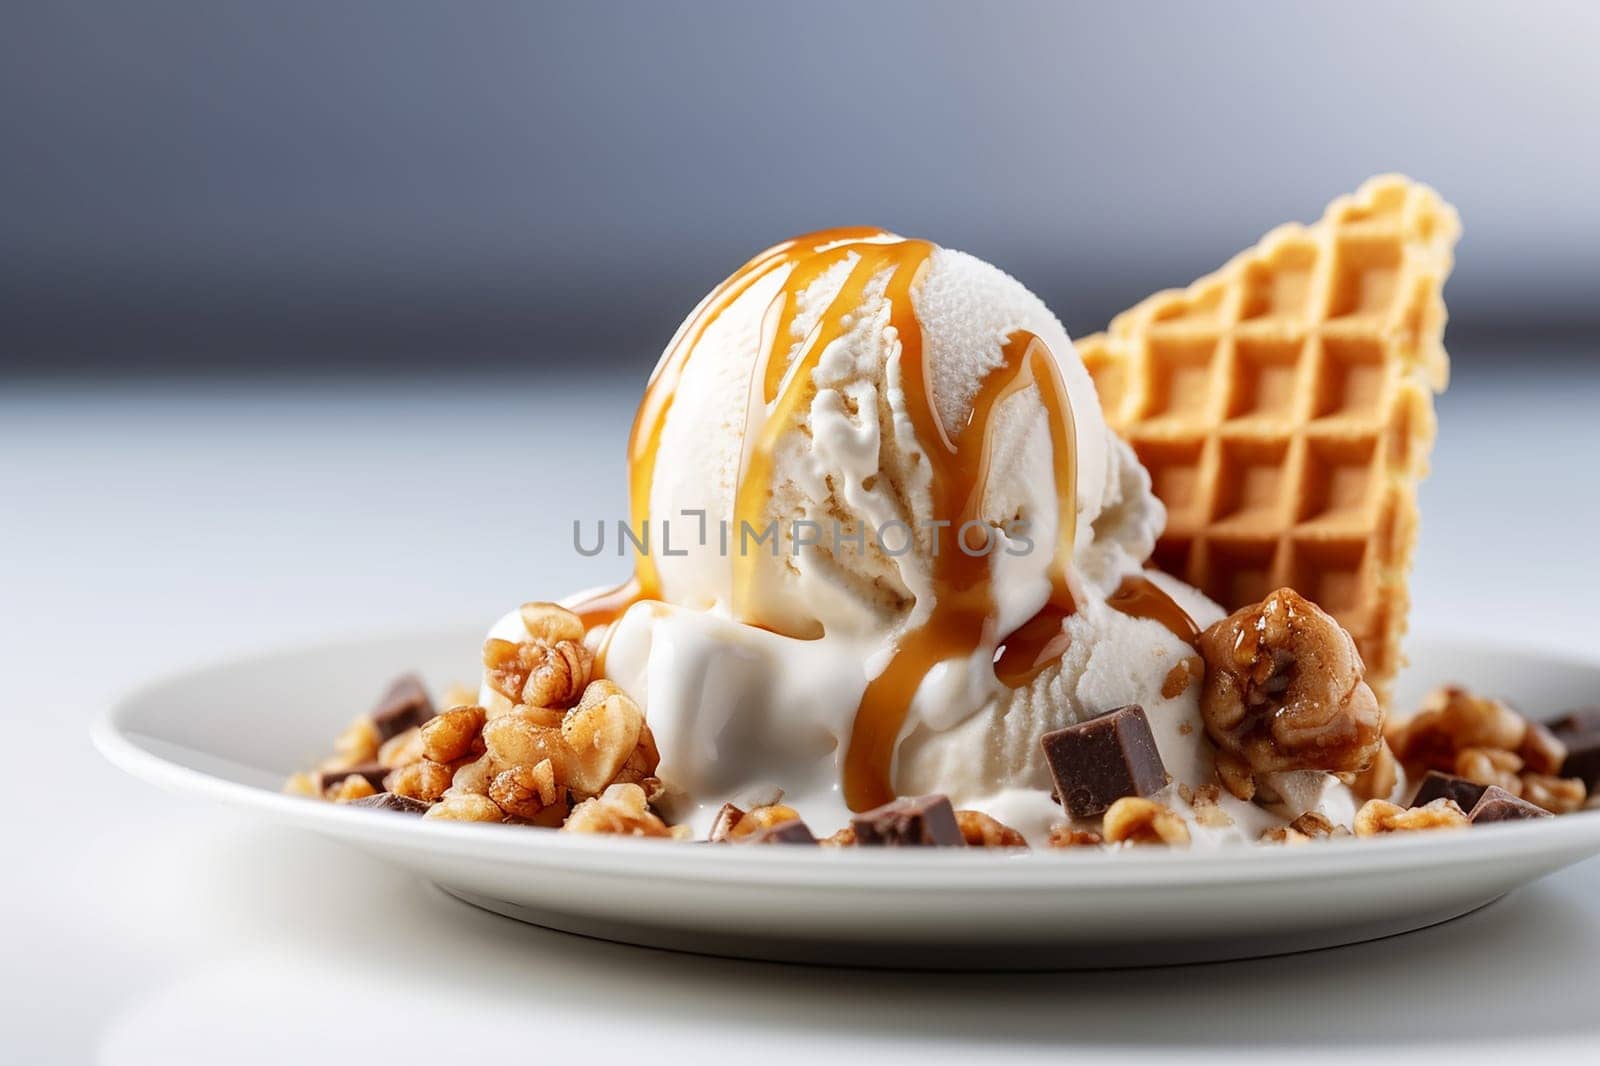 Vanilla ice cream waffle with caramel, nuts, and chocolate by Hype2art